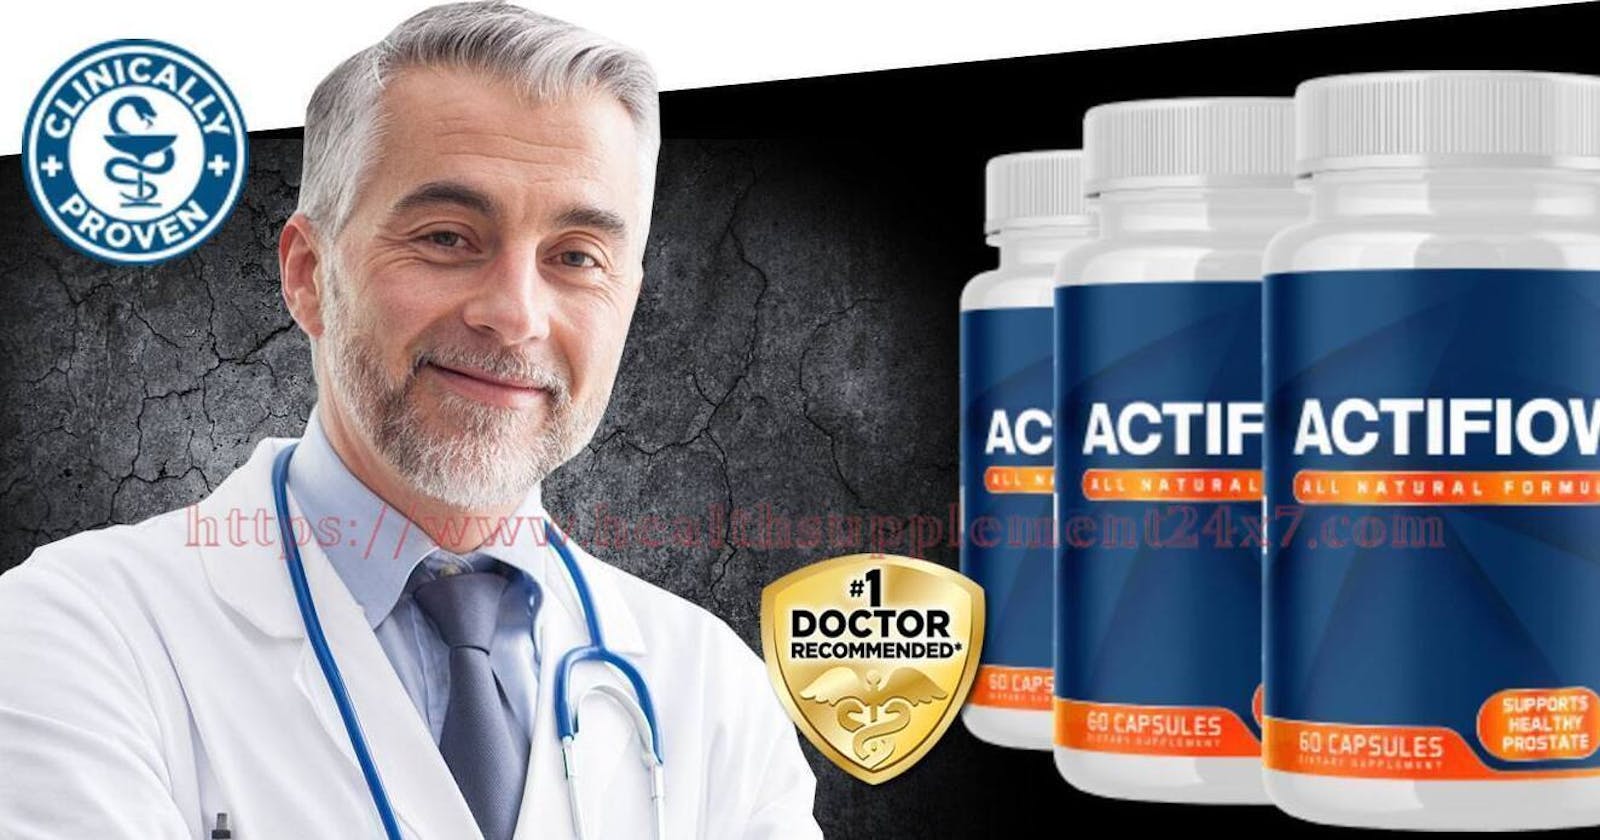 Actiflow Prostate Formula Reviews To Support Lasting Prostate Health, Including Optimal Flow Support(Work Or Hoax)